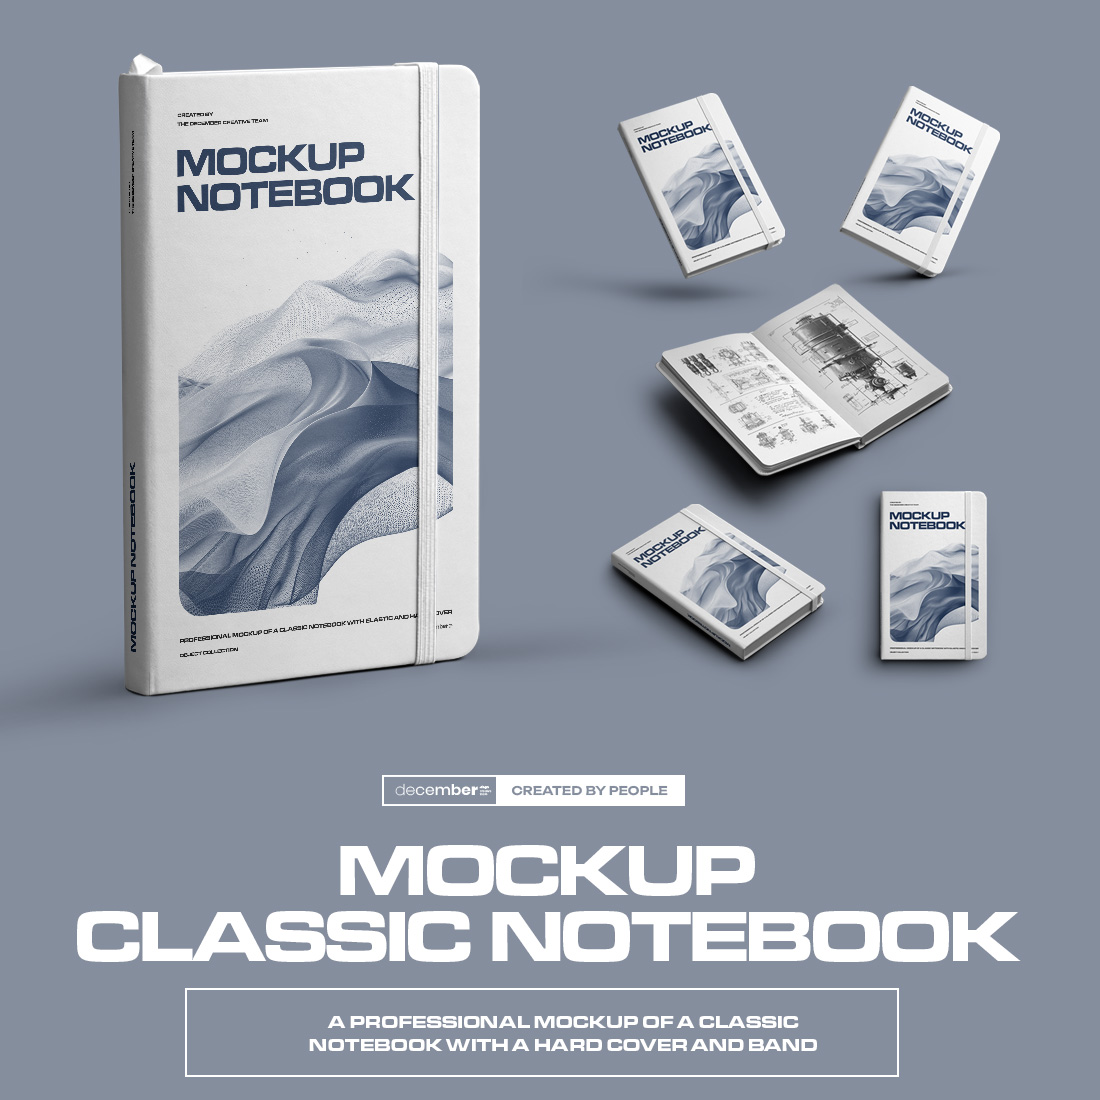 6 Mockups of Classic Notebook with Band and Hard Cover cover image.